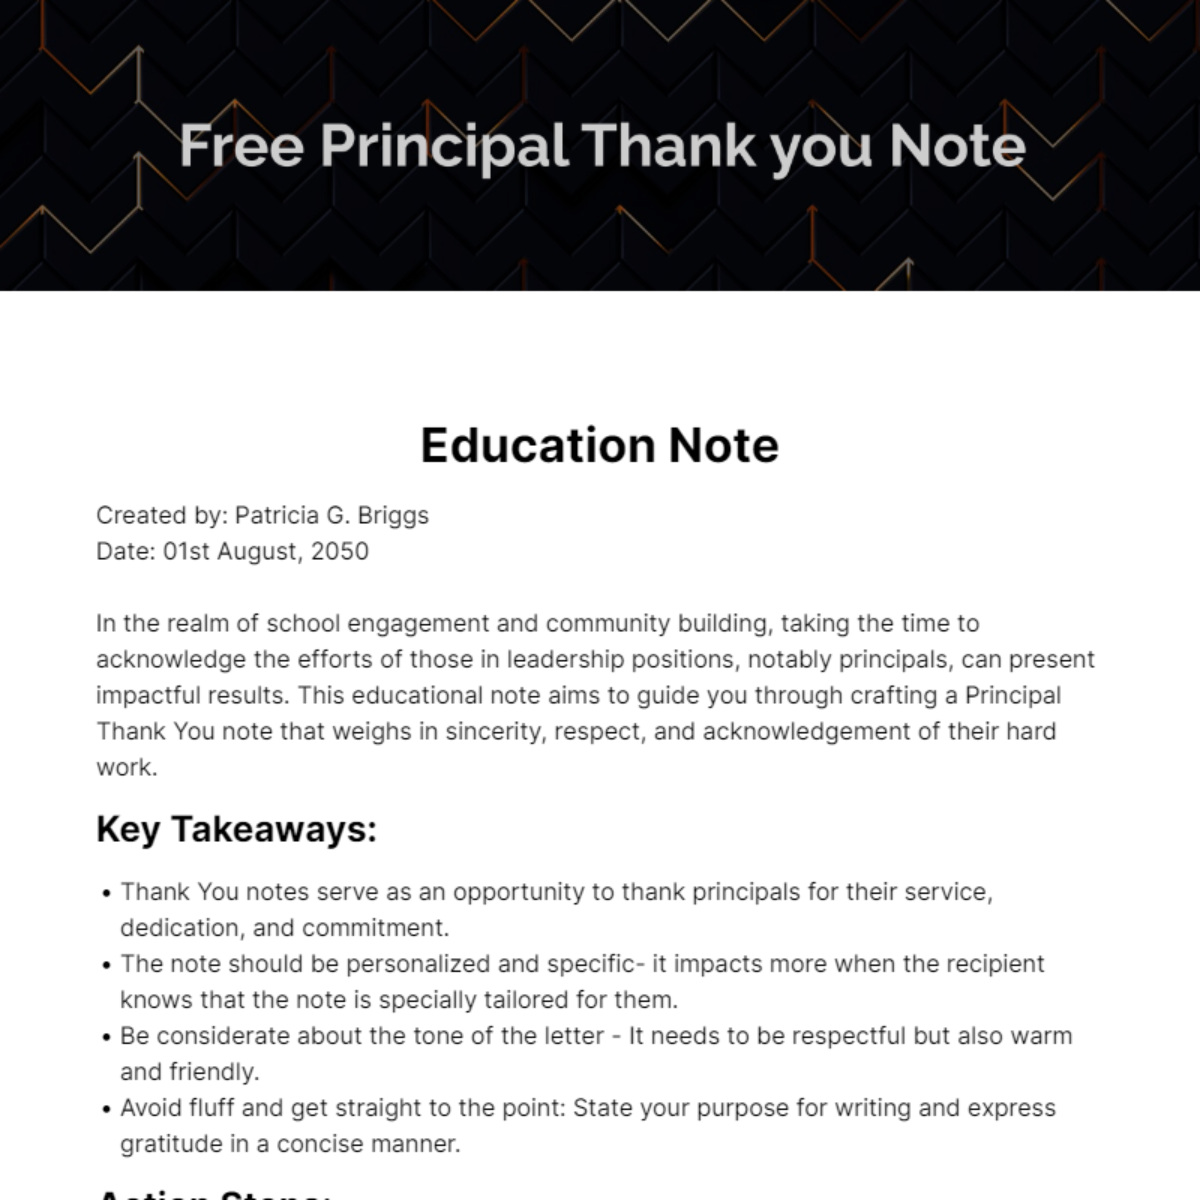 Free Principal Thank you Note Template